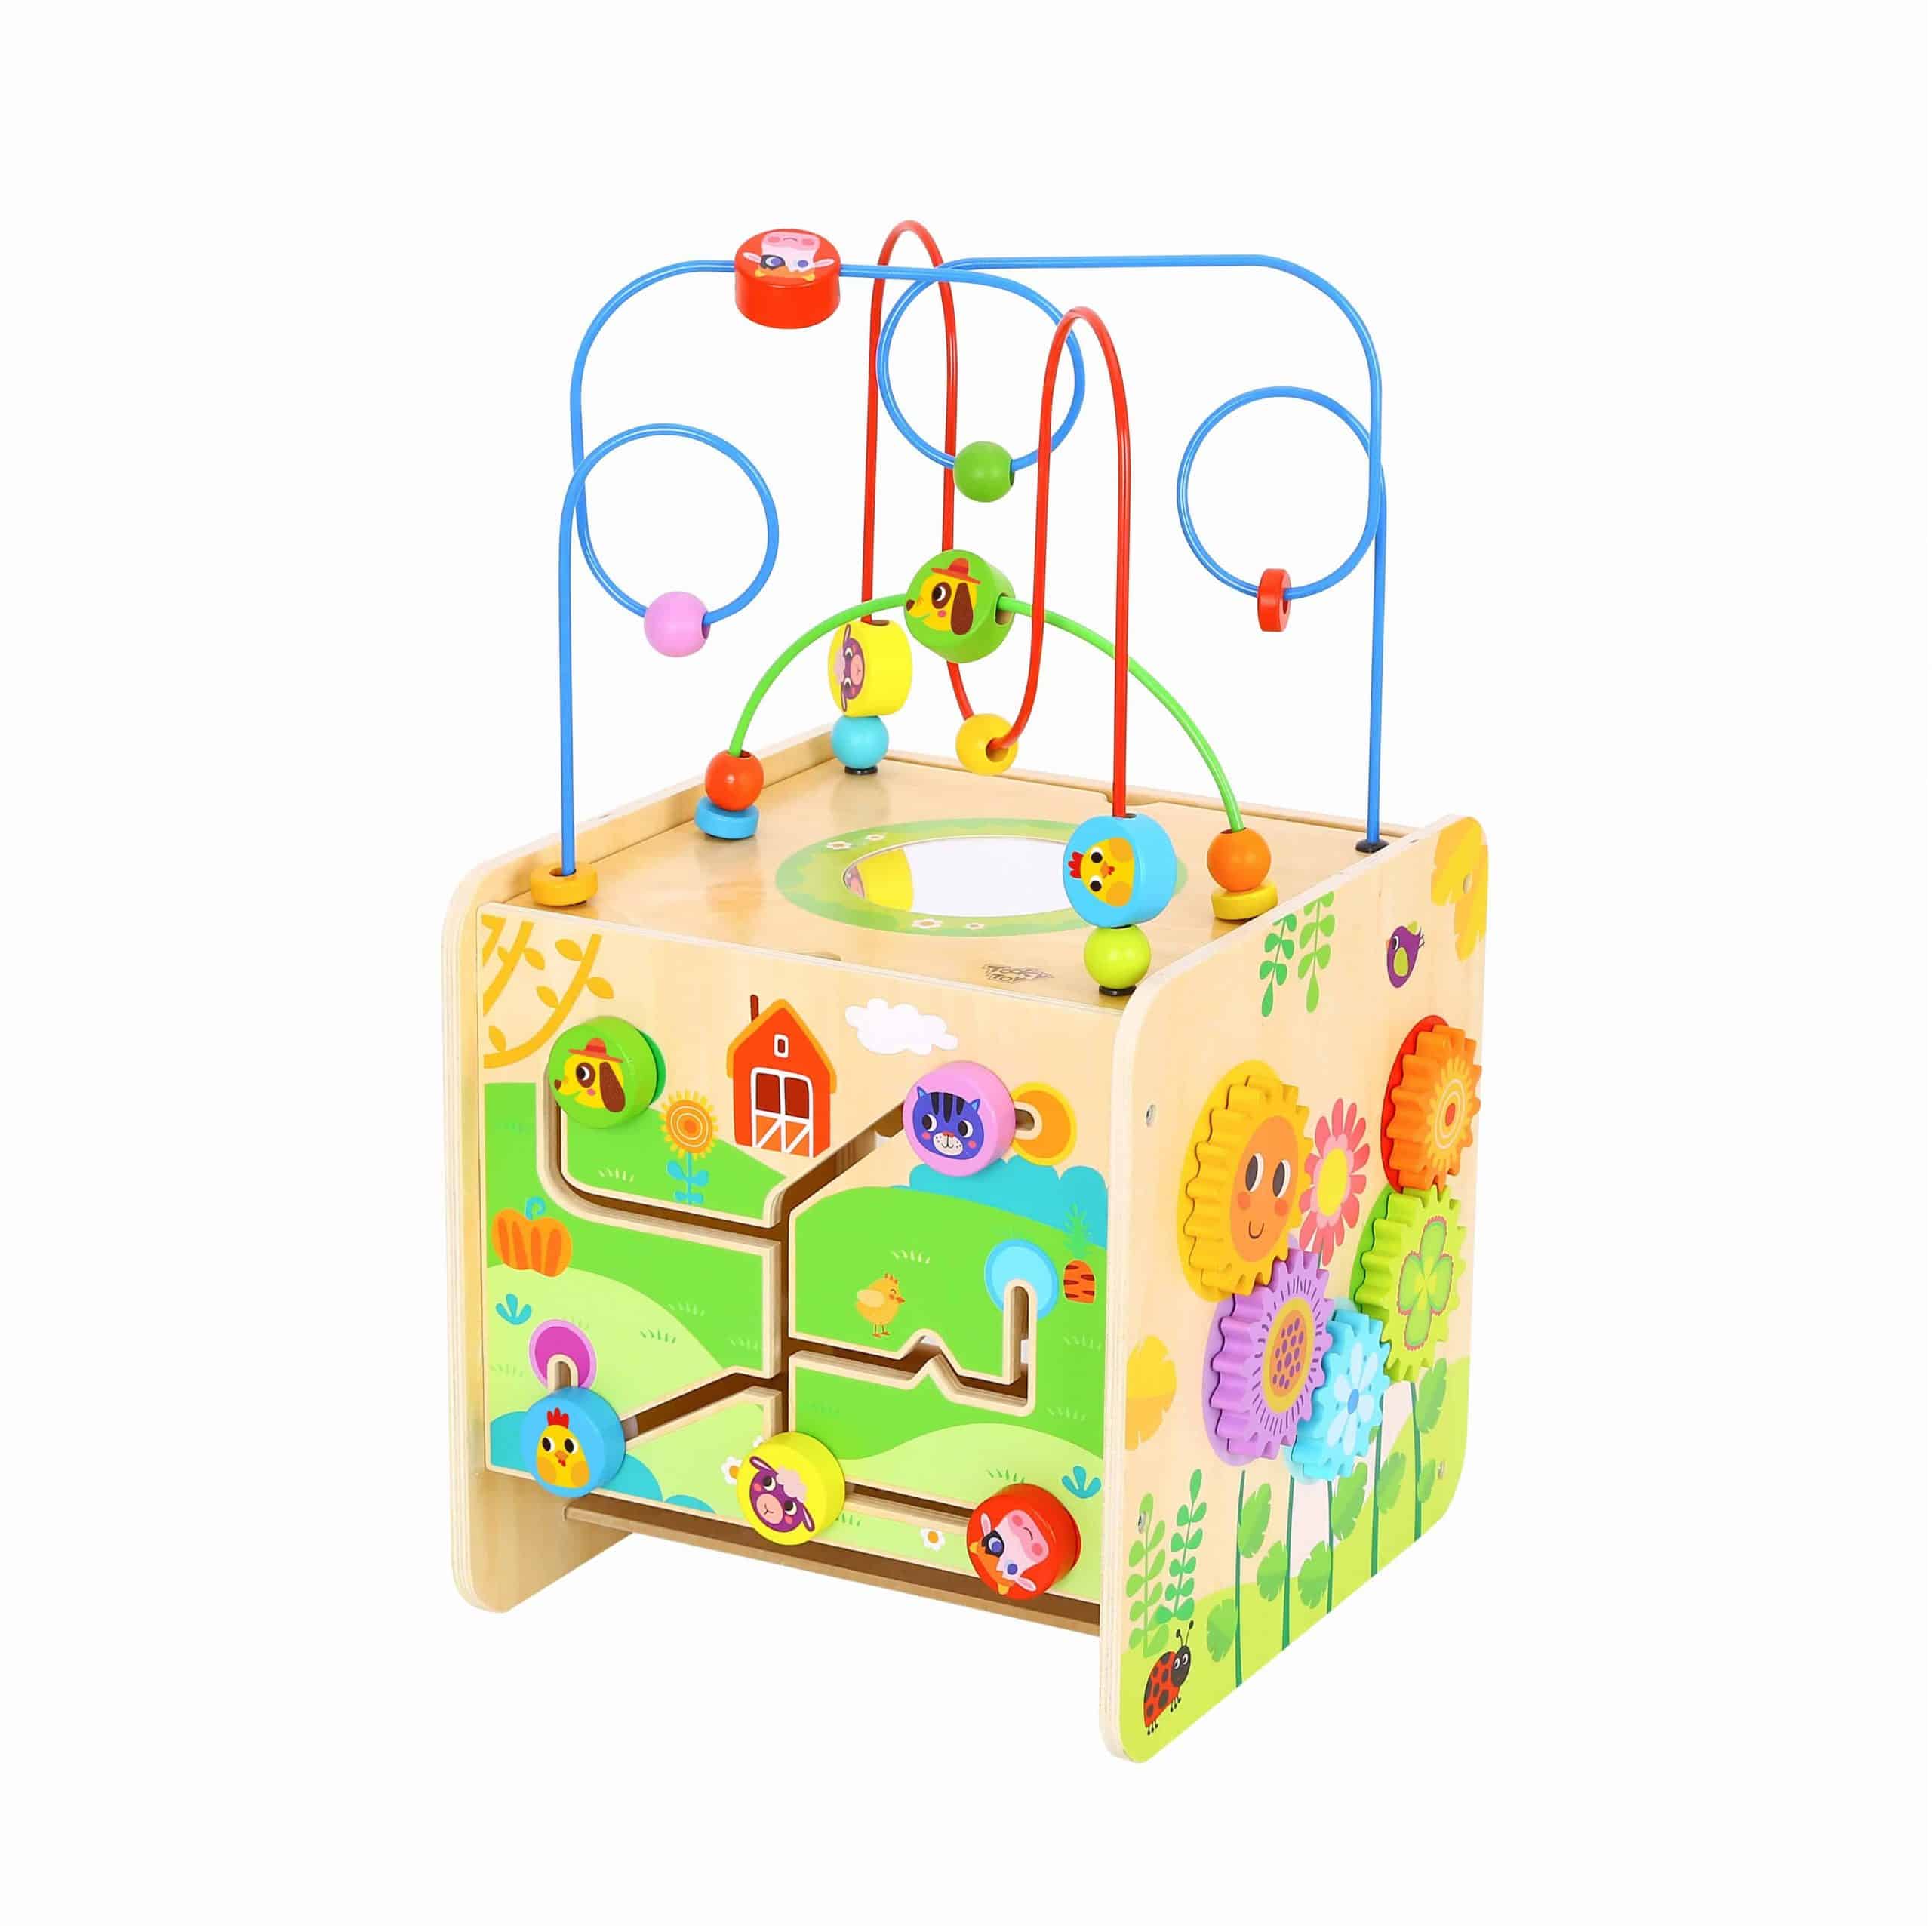 Play Cube Centre Farm Tooky Toy 1598156951 scaled | Trio Kids Singapore | December, 2022